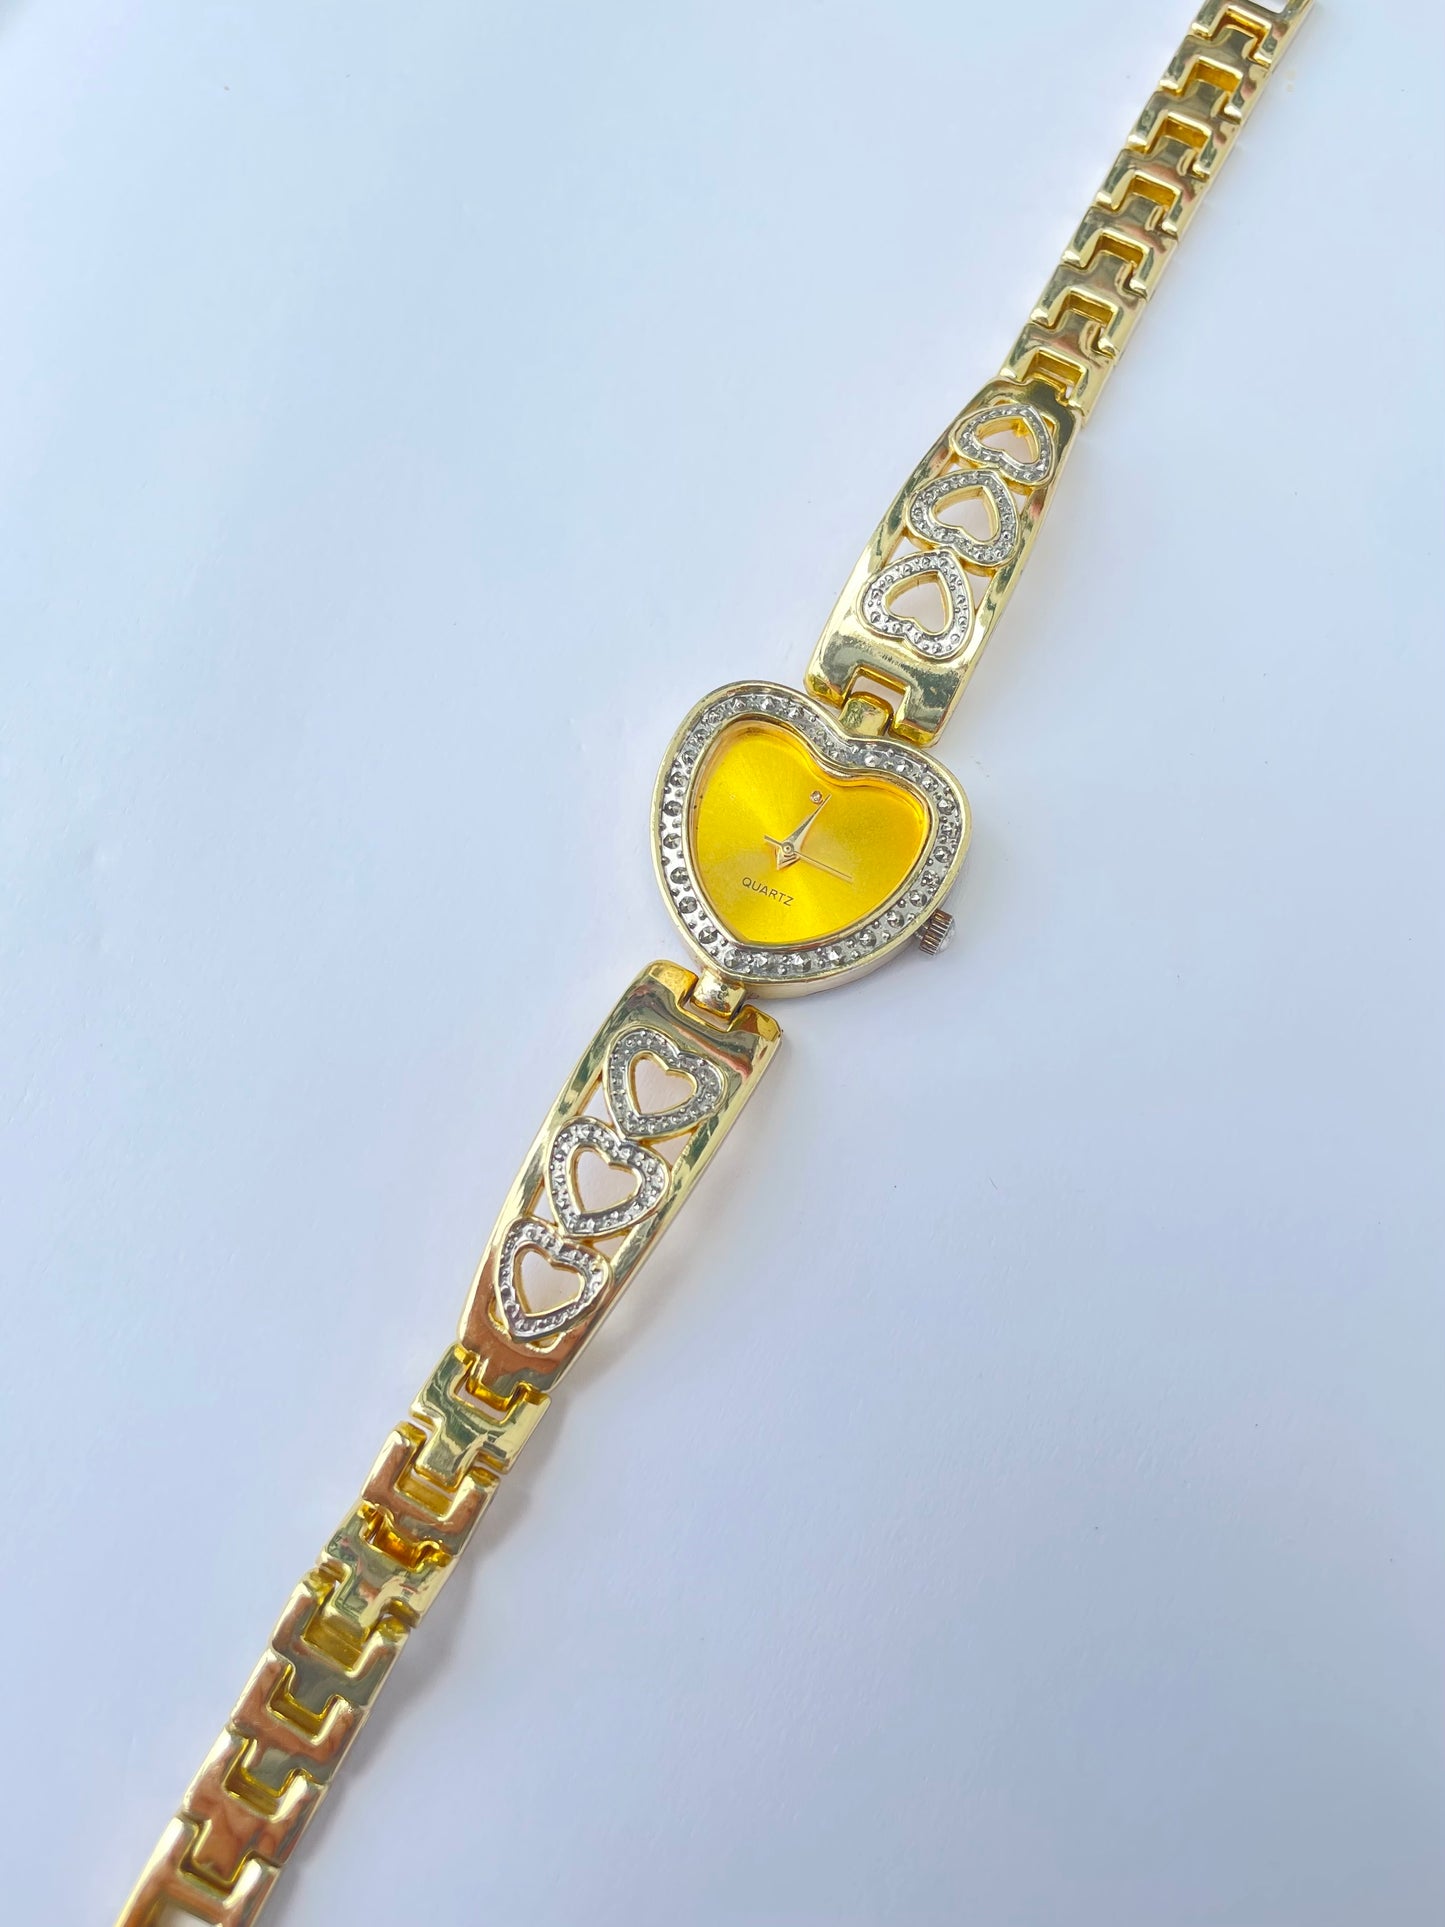 The Yellow Heart Watch